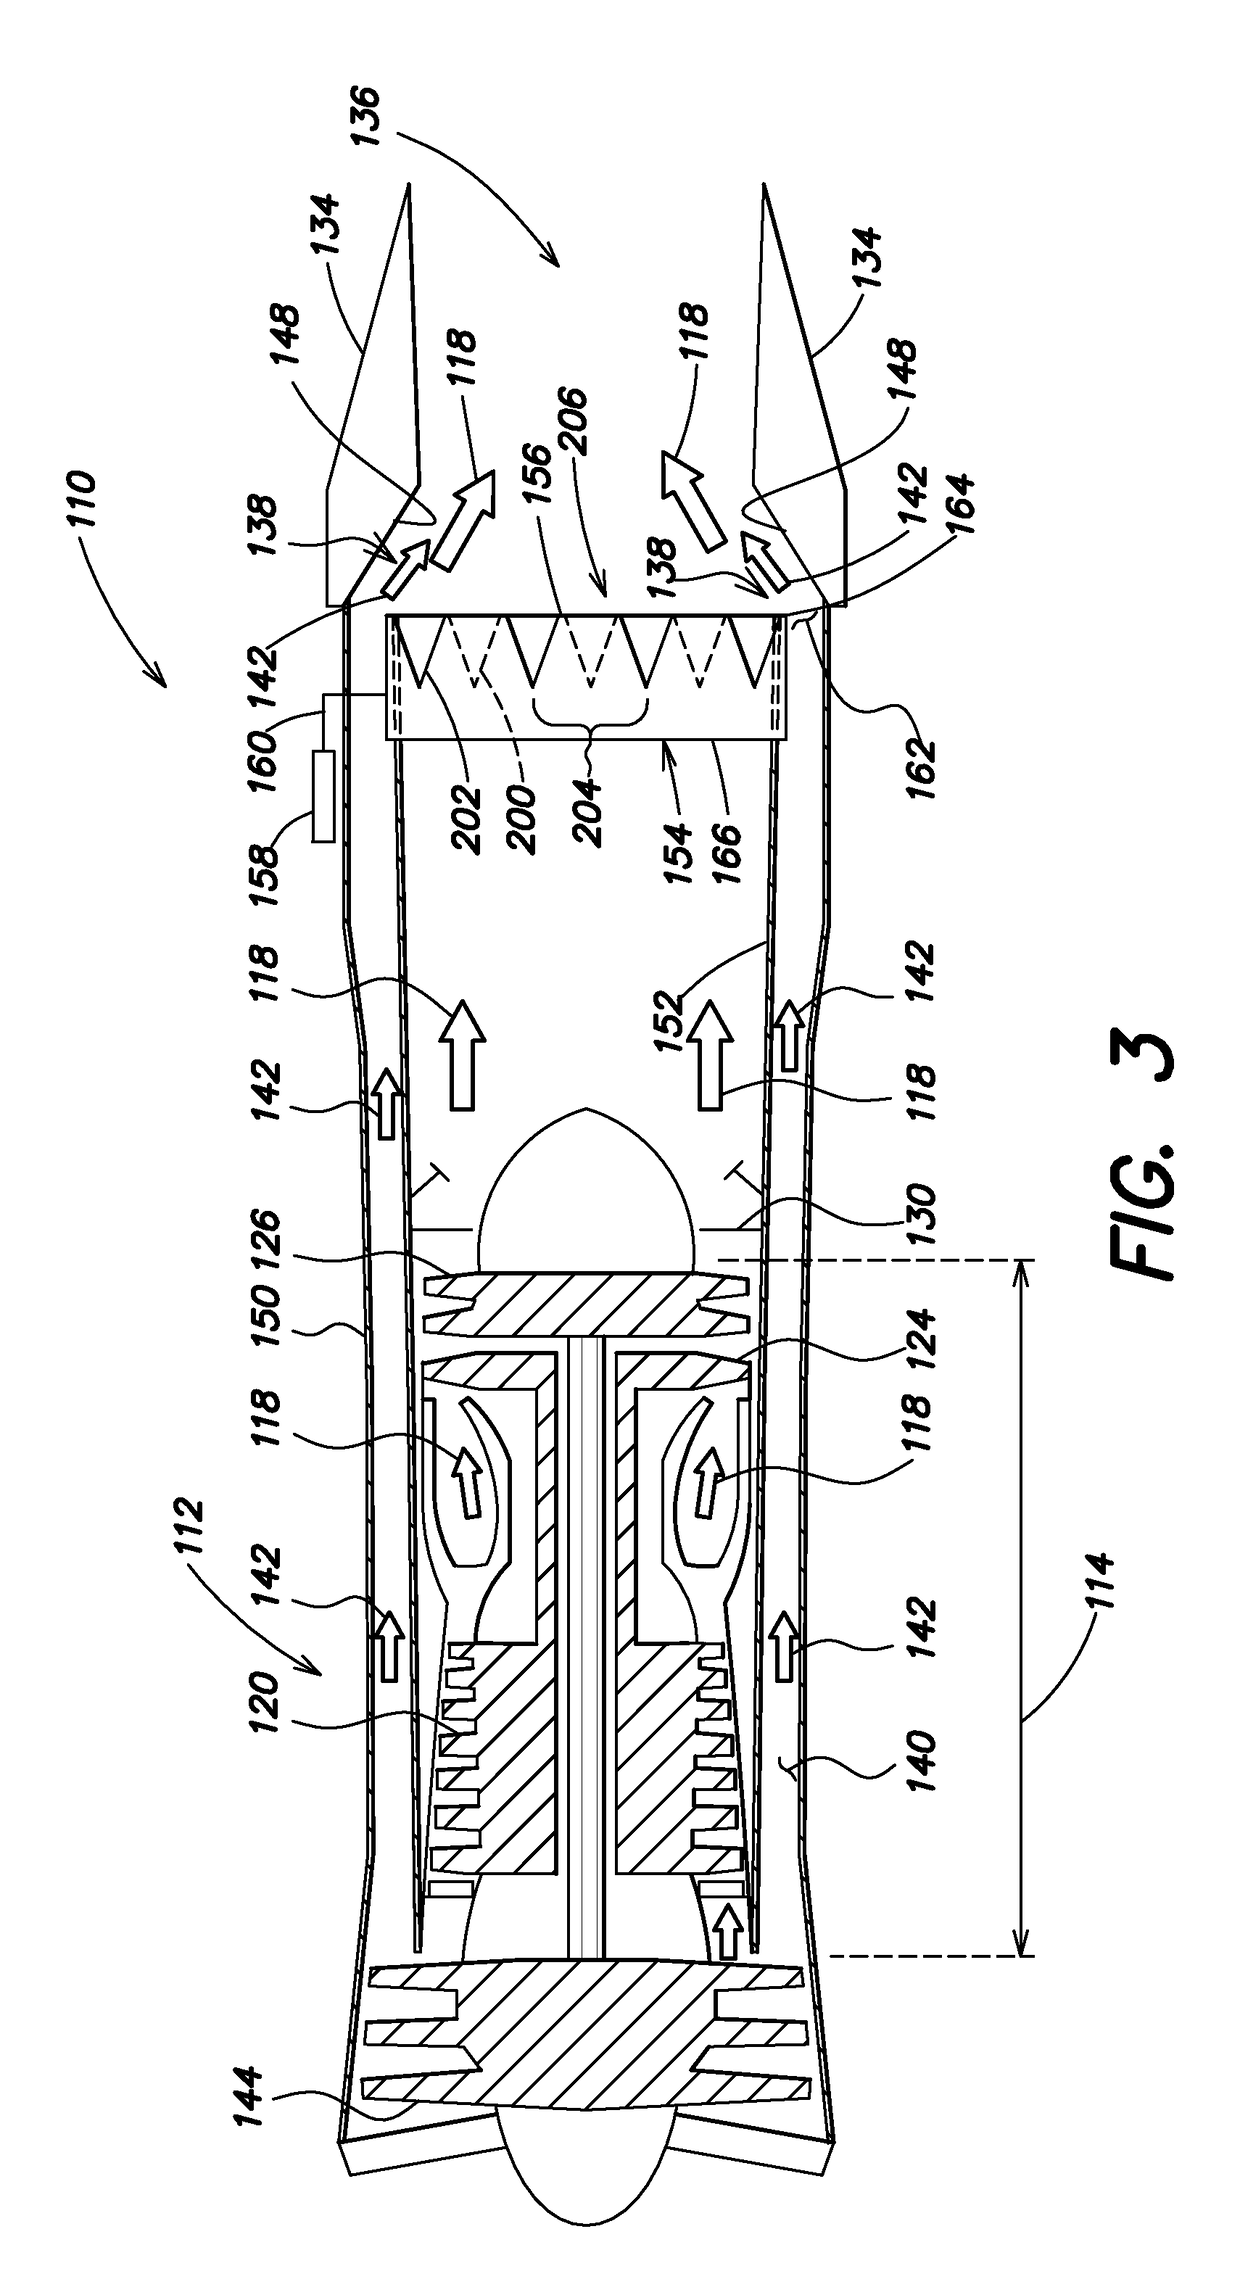 Gas turbine engine system for modulating flow of fan by-pass air and core engine air